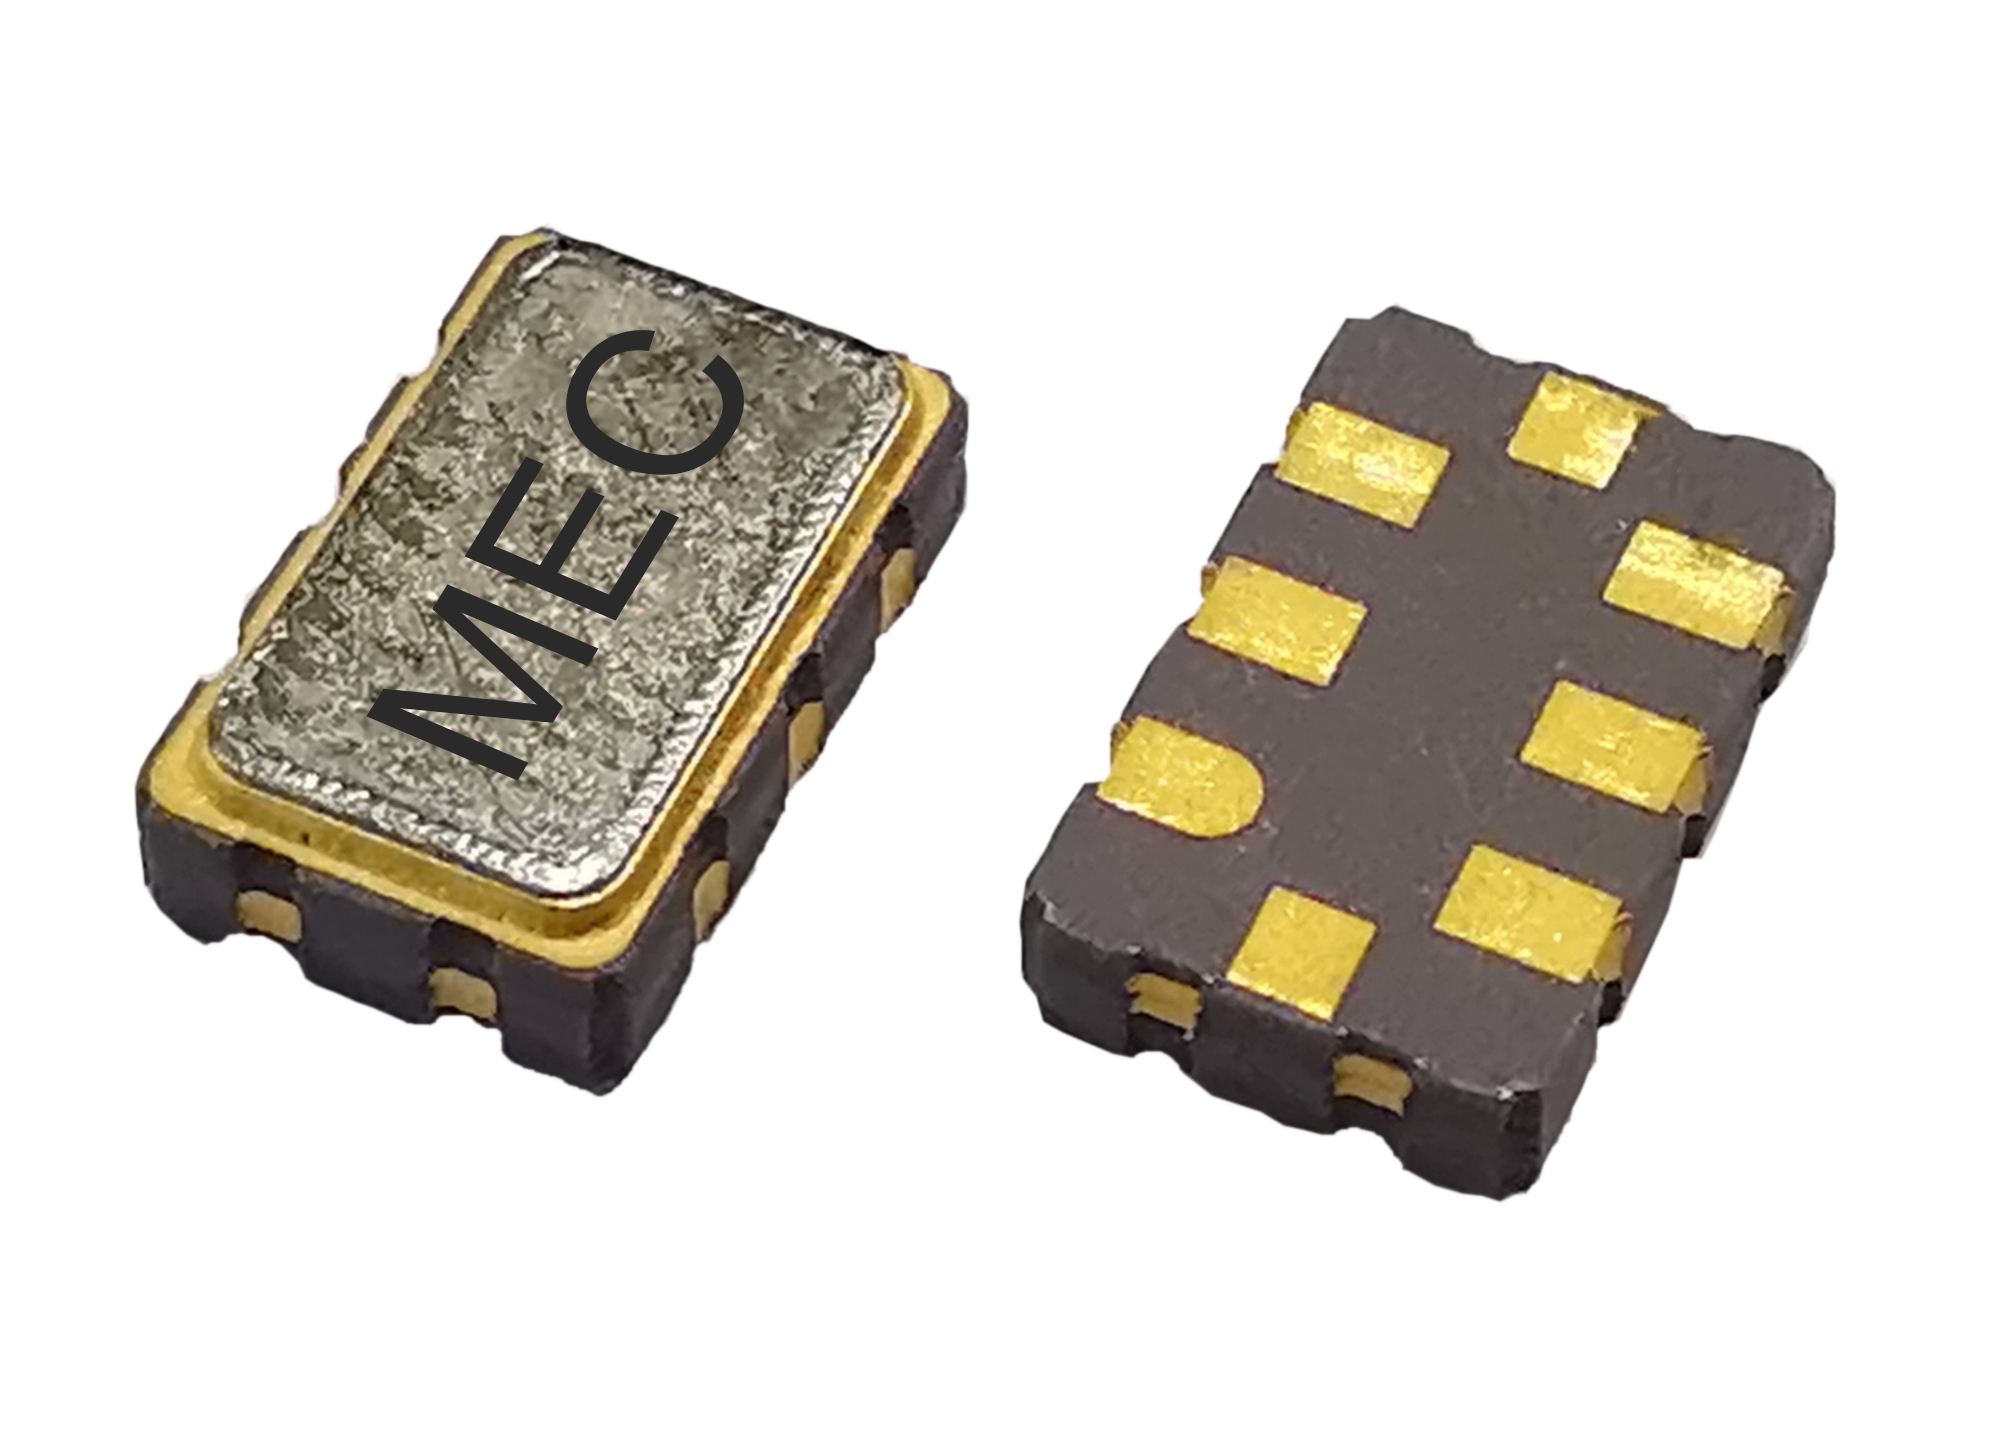 GCJF538 5032 3.3V Ultra Low Jitter Quick-turn Programmable Differential HCSL SMD Voltage Controlled Crystal Oscillator